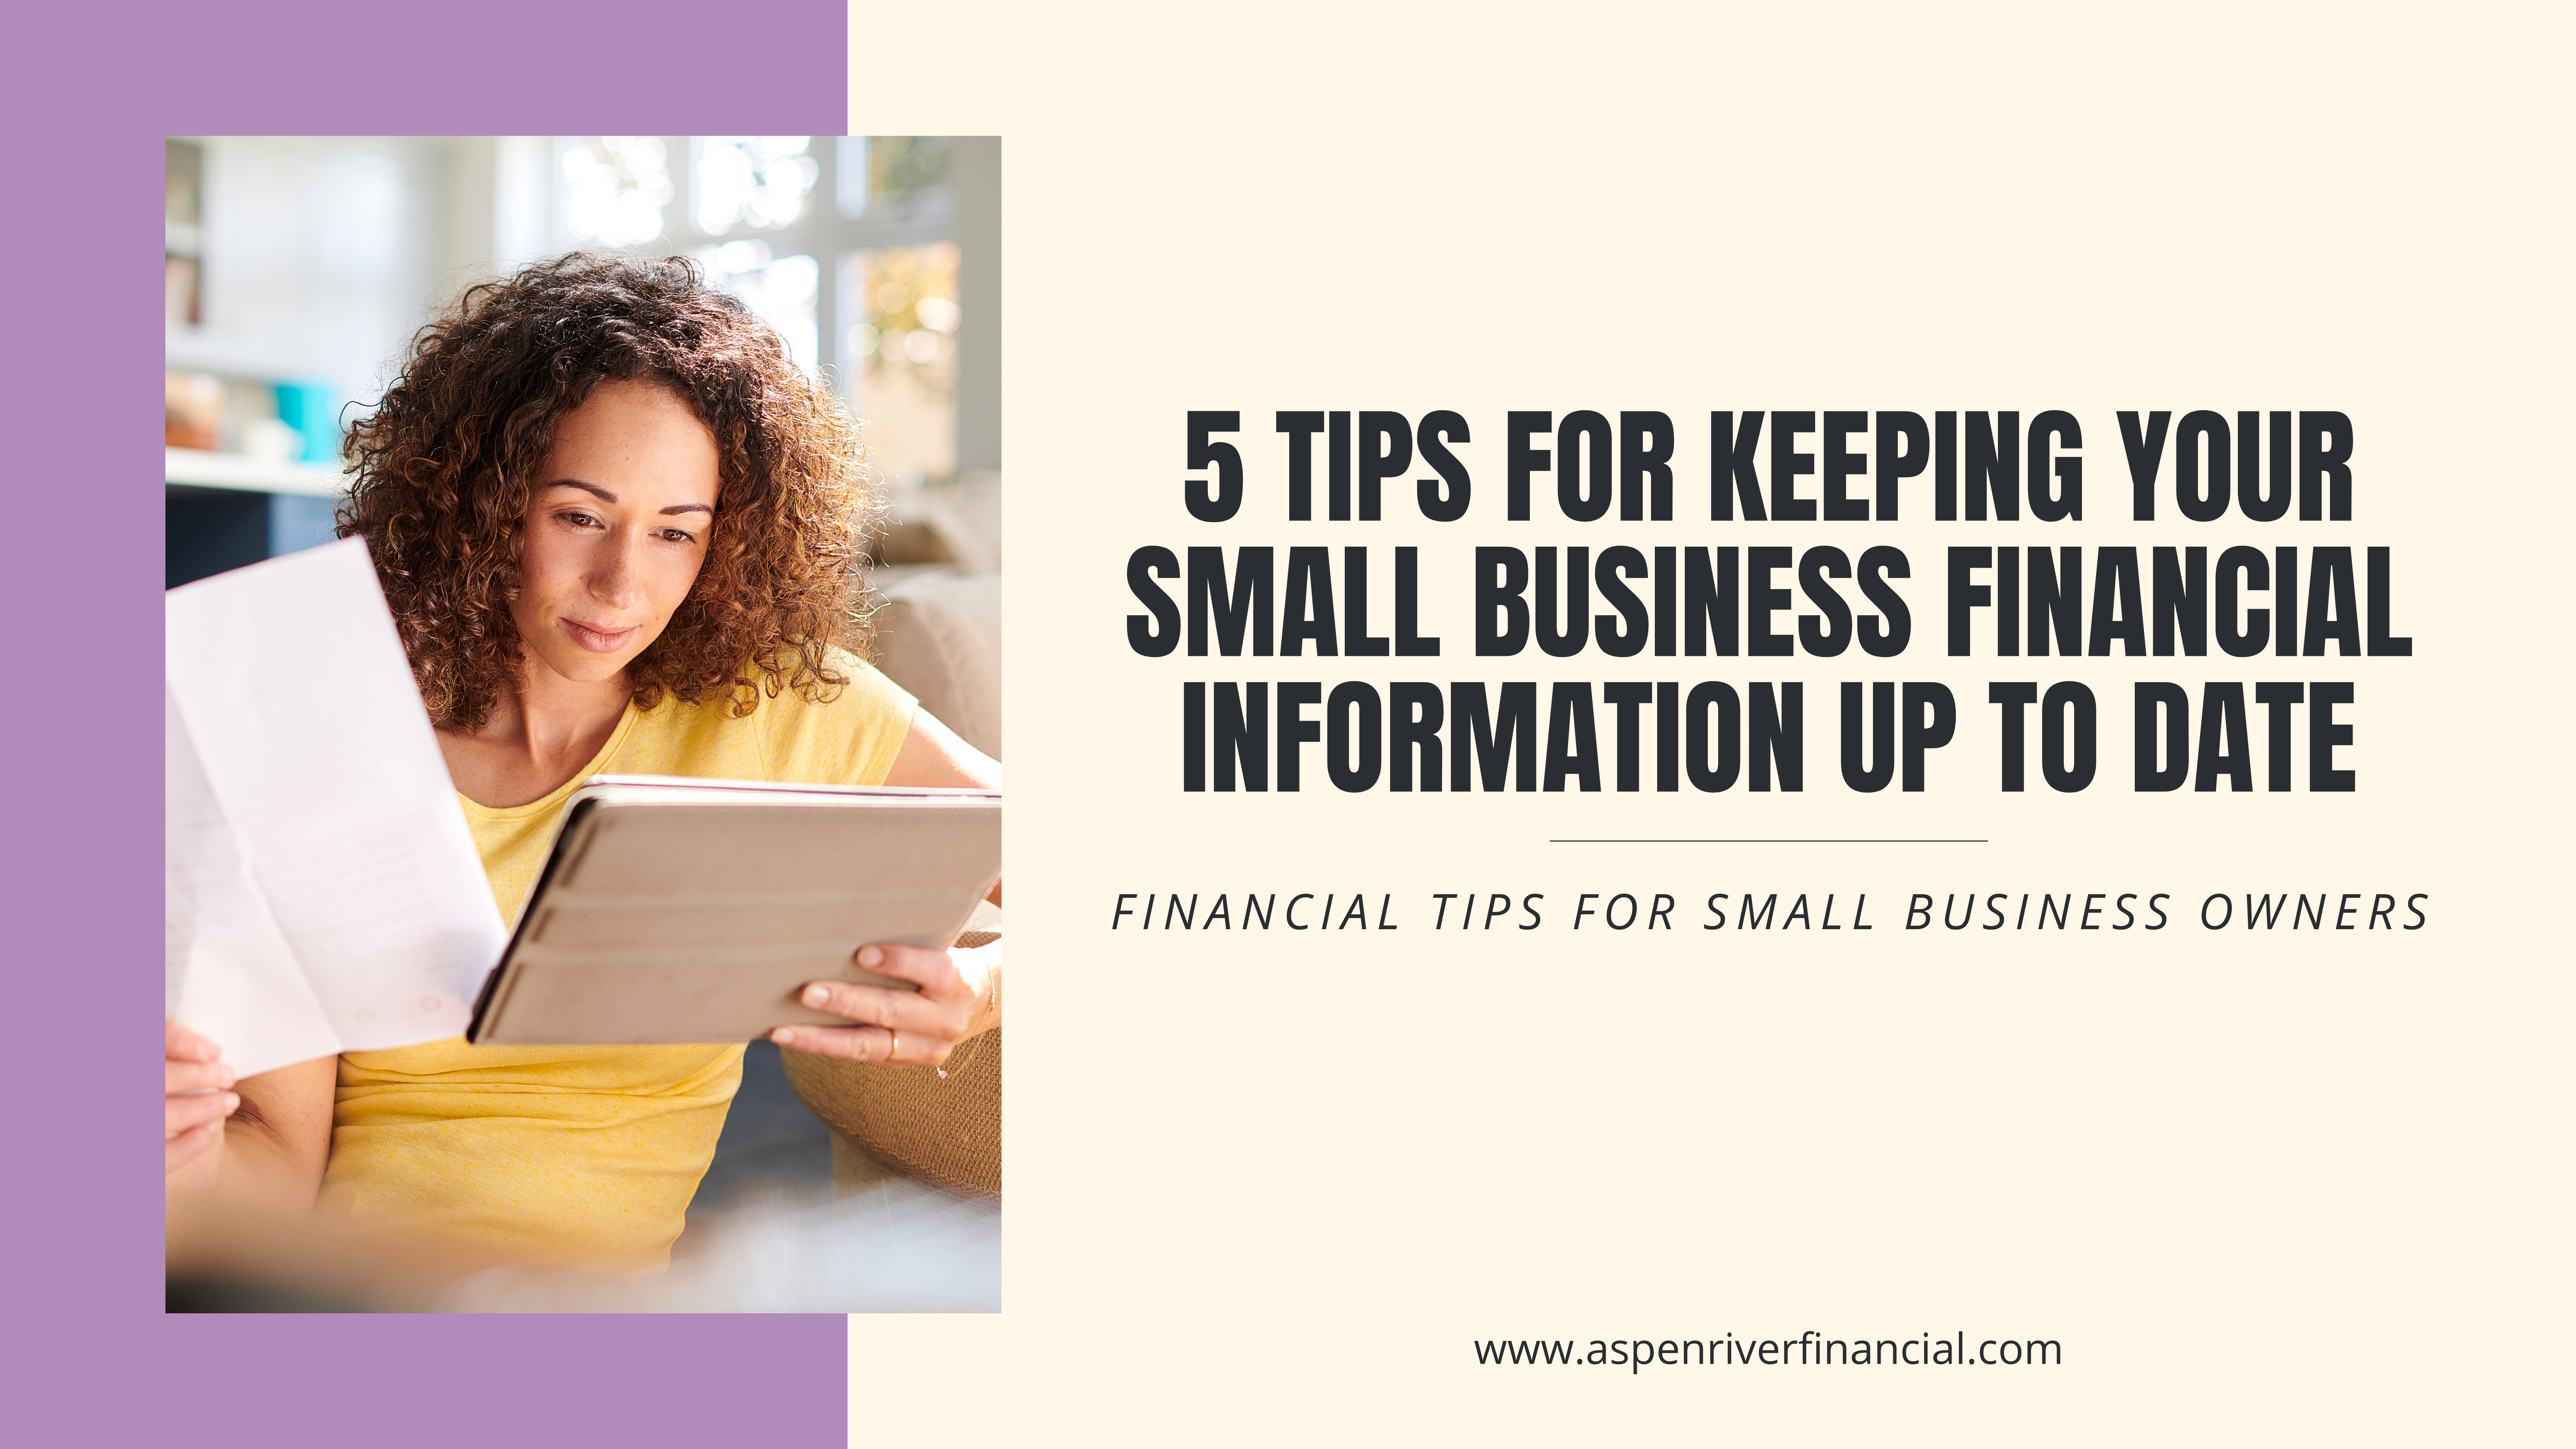 5 Tips for Keeping Your Small Business Financial Information Up to Date